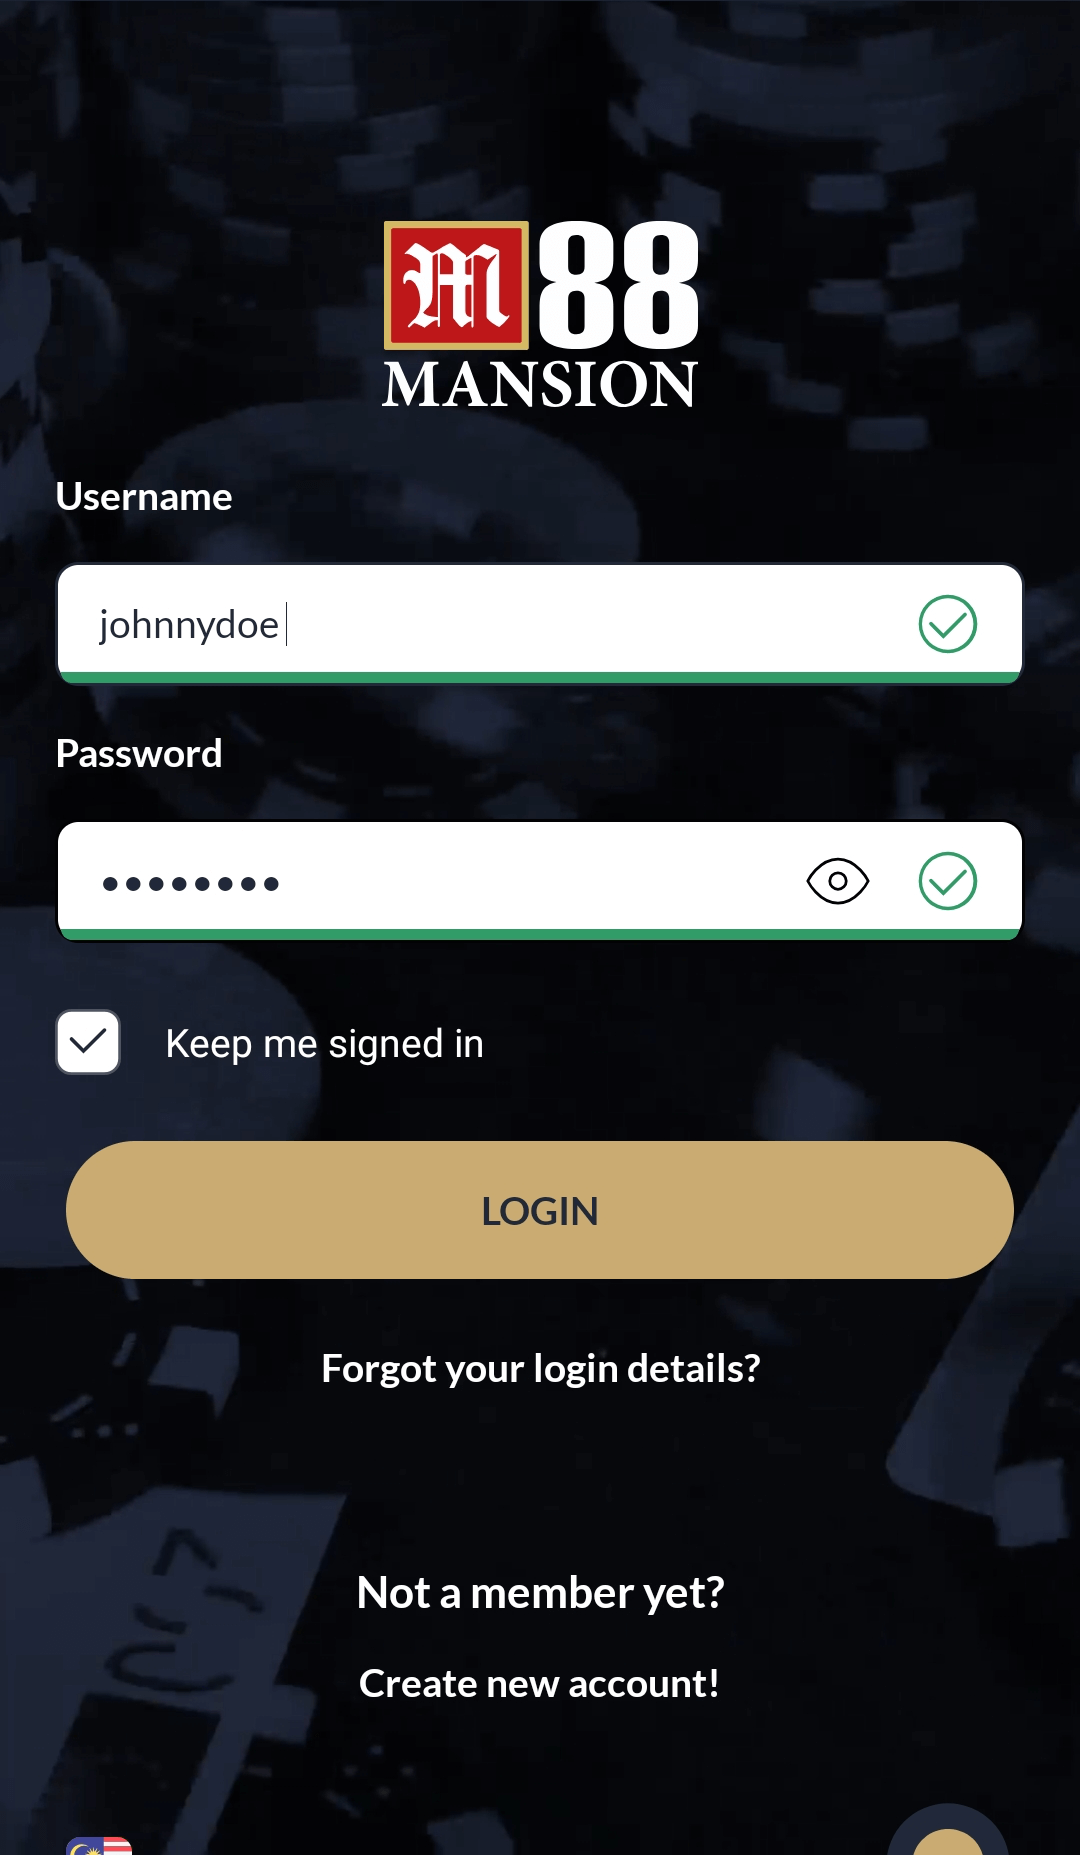 Authorization in the M88 app